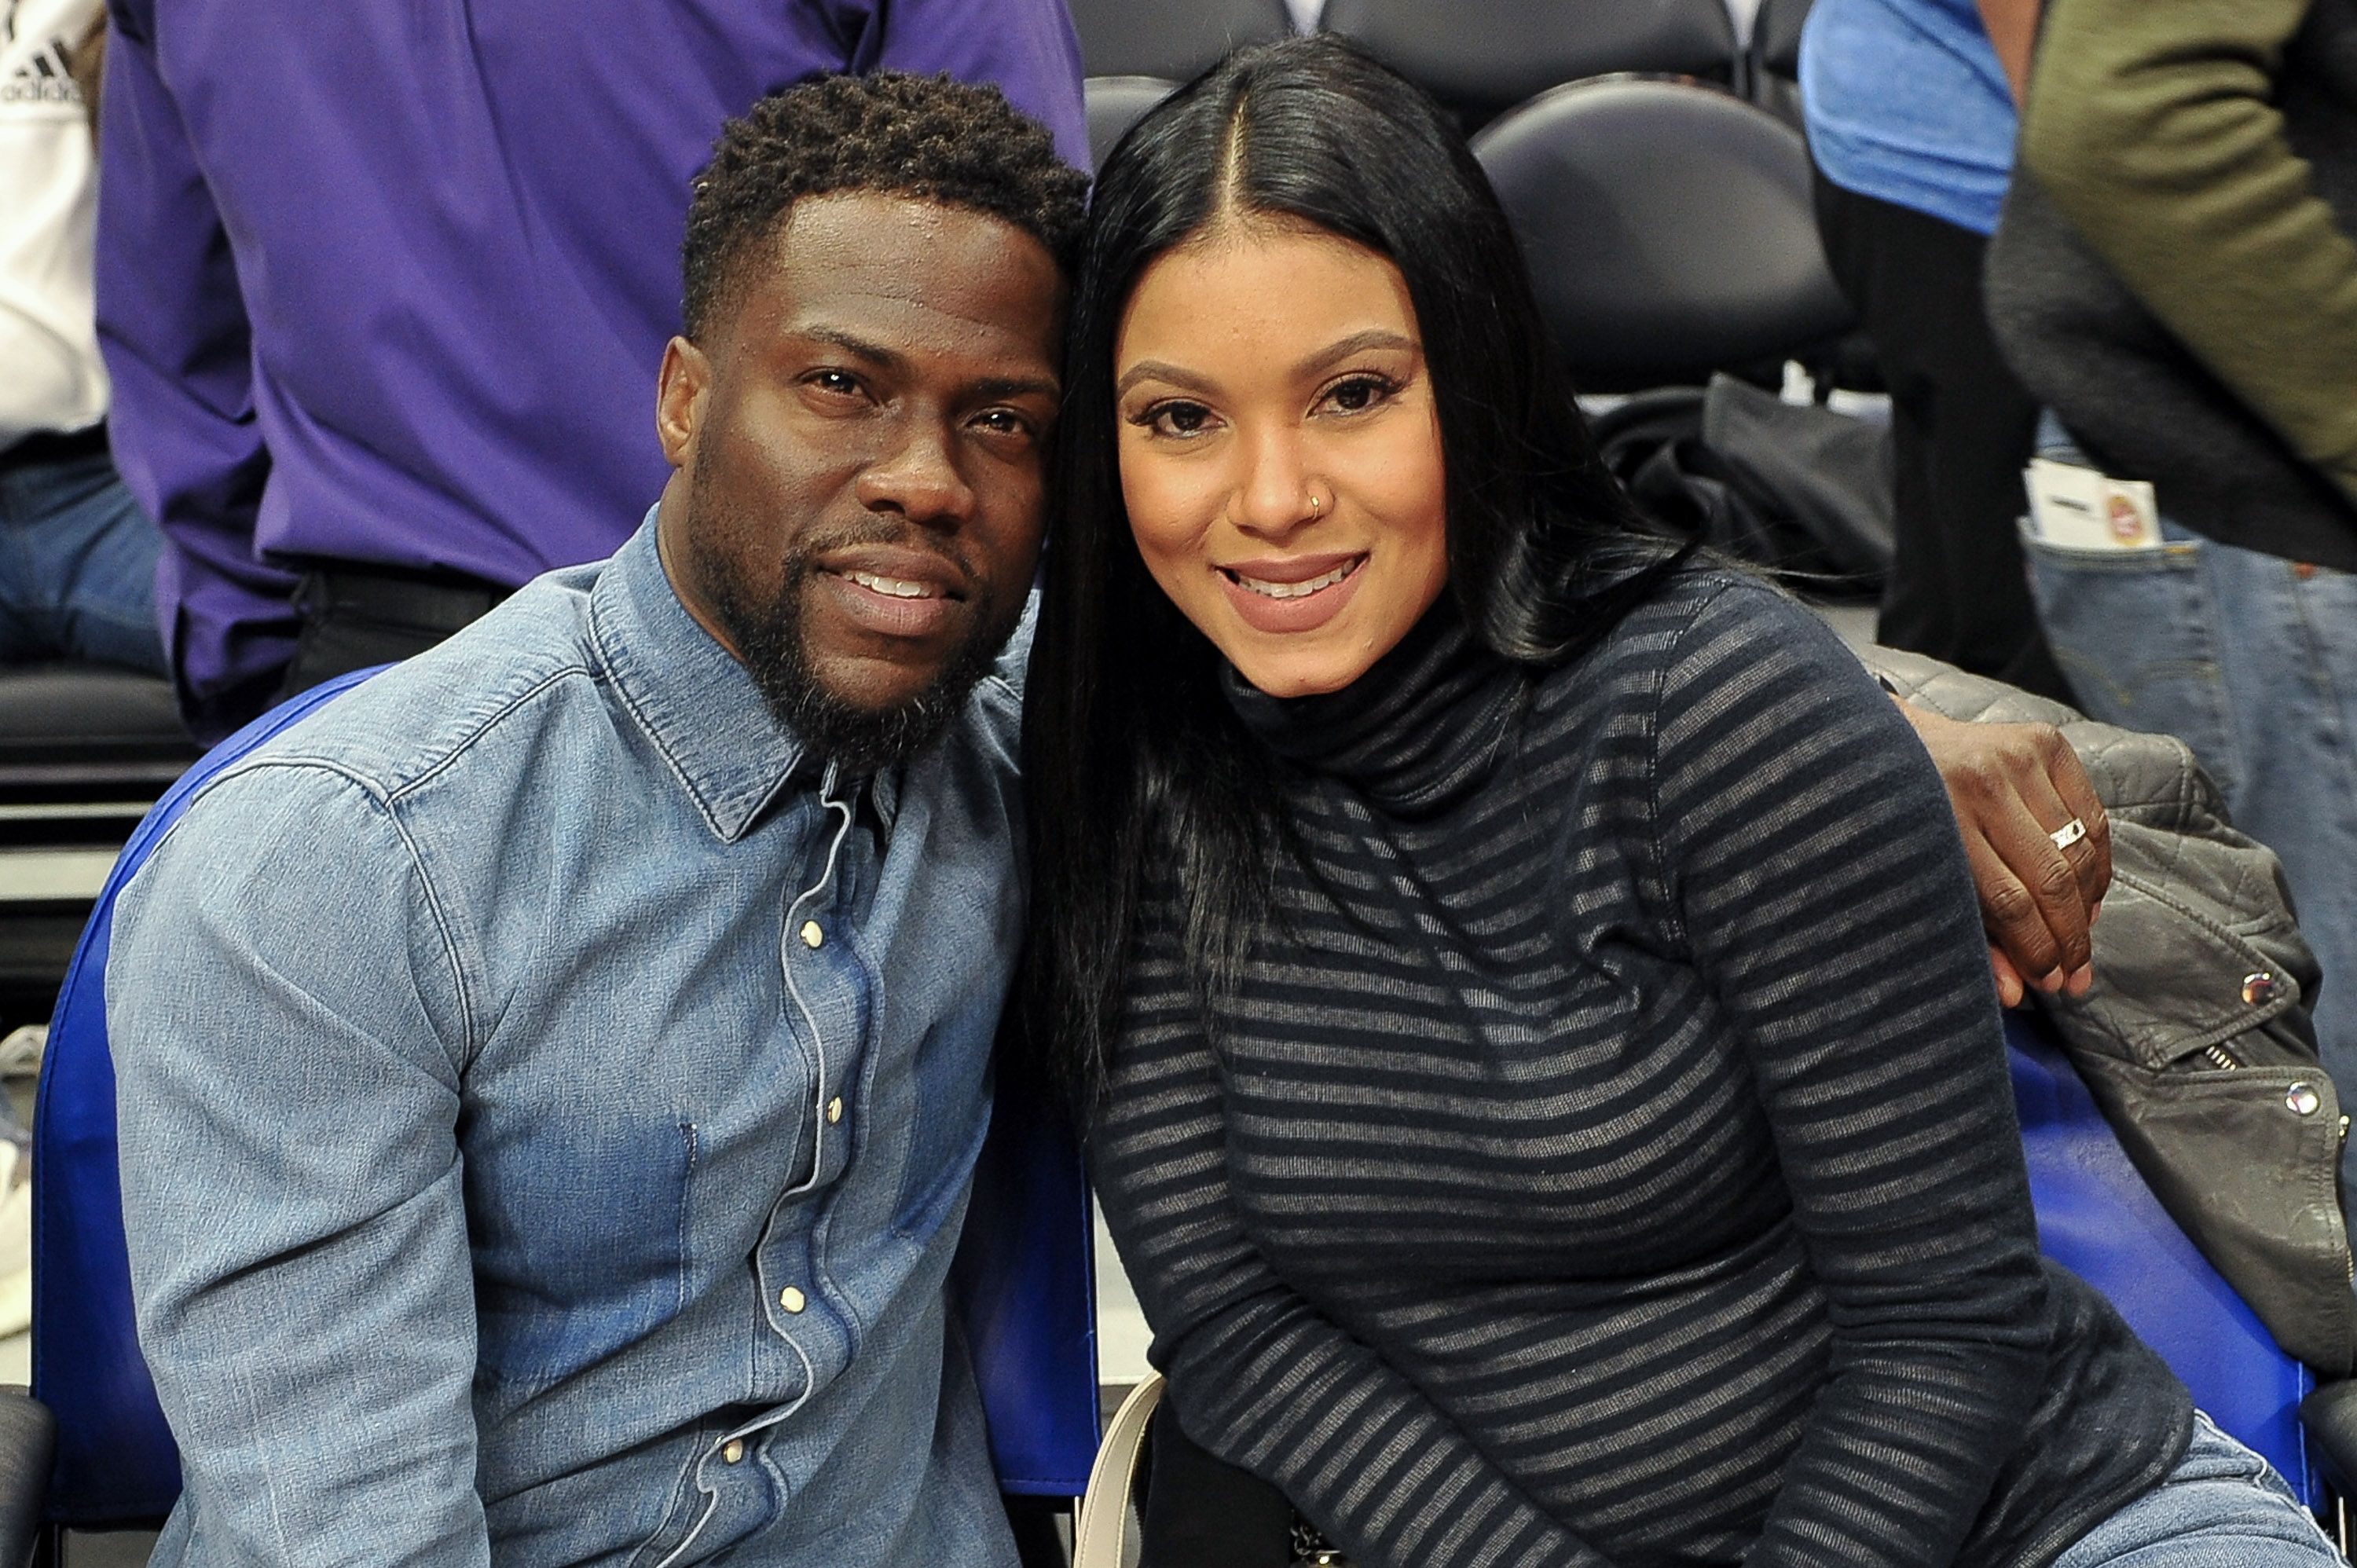 Actor Kevin Hart and Eniko Parrish at a basketball game between the Los Angeles Clippers and the Minnesota Timberwolves at Staples Center in Los Angeles on January 22, 2018 | Photo: Getty Images